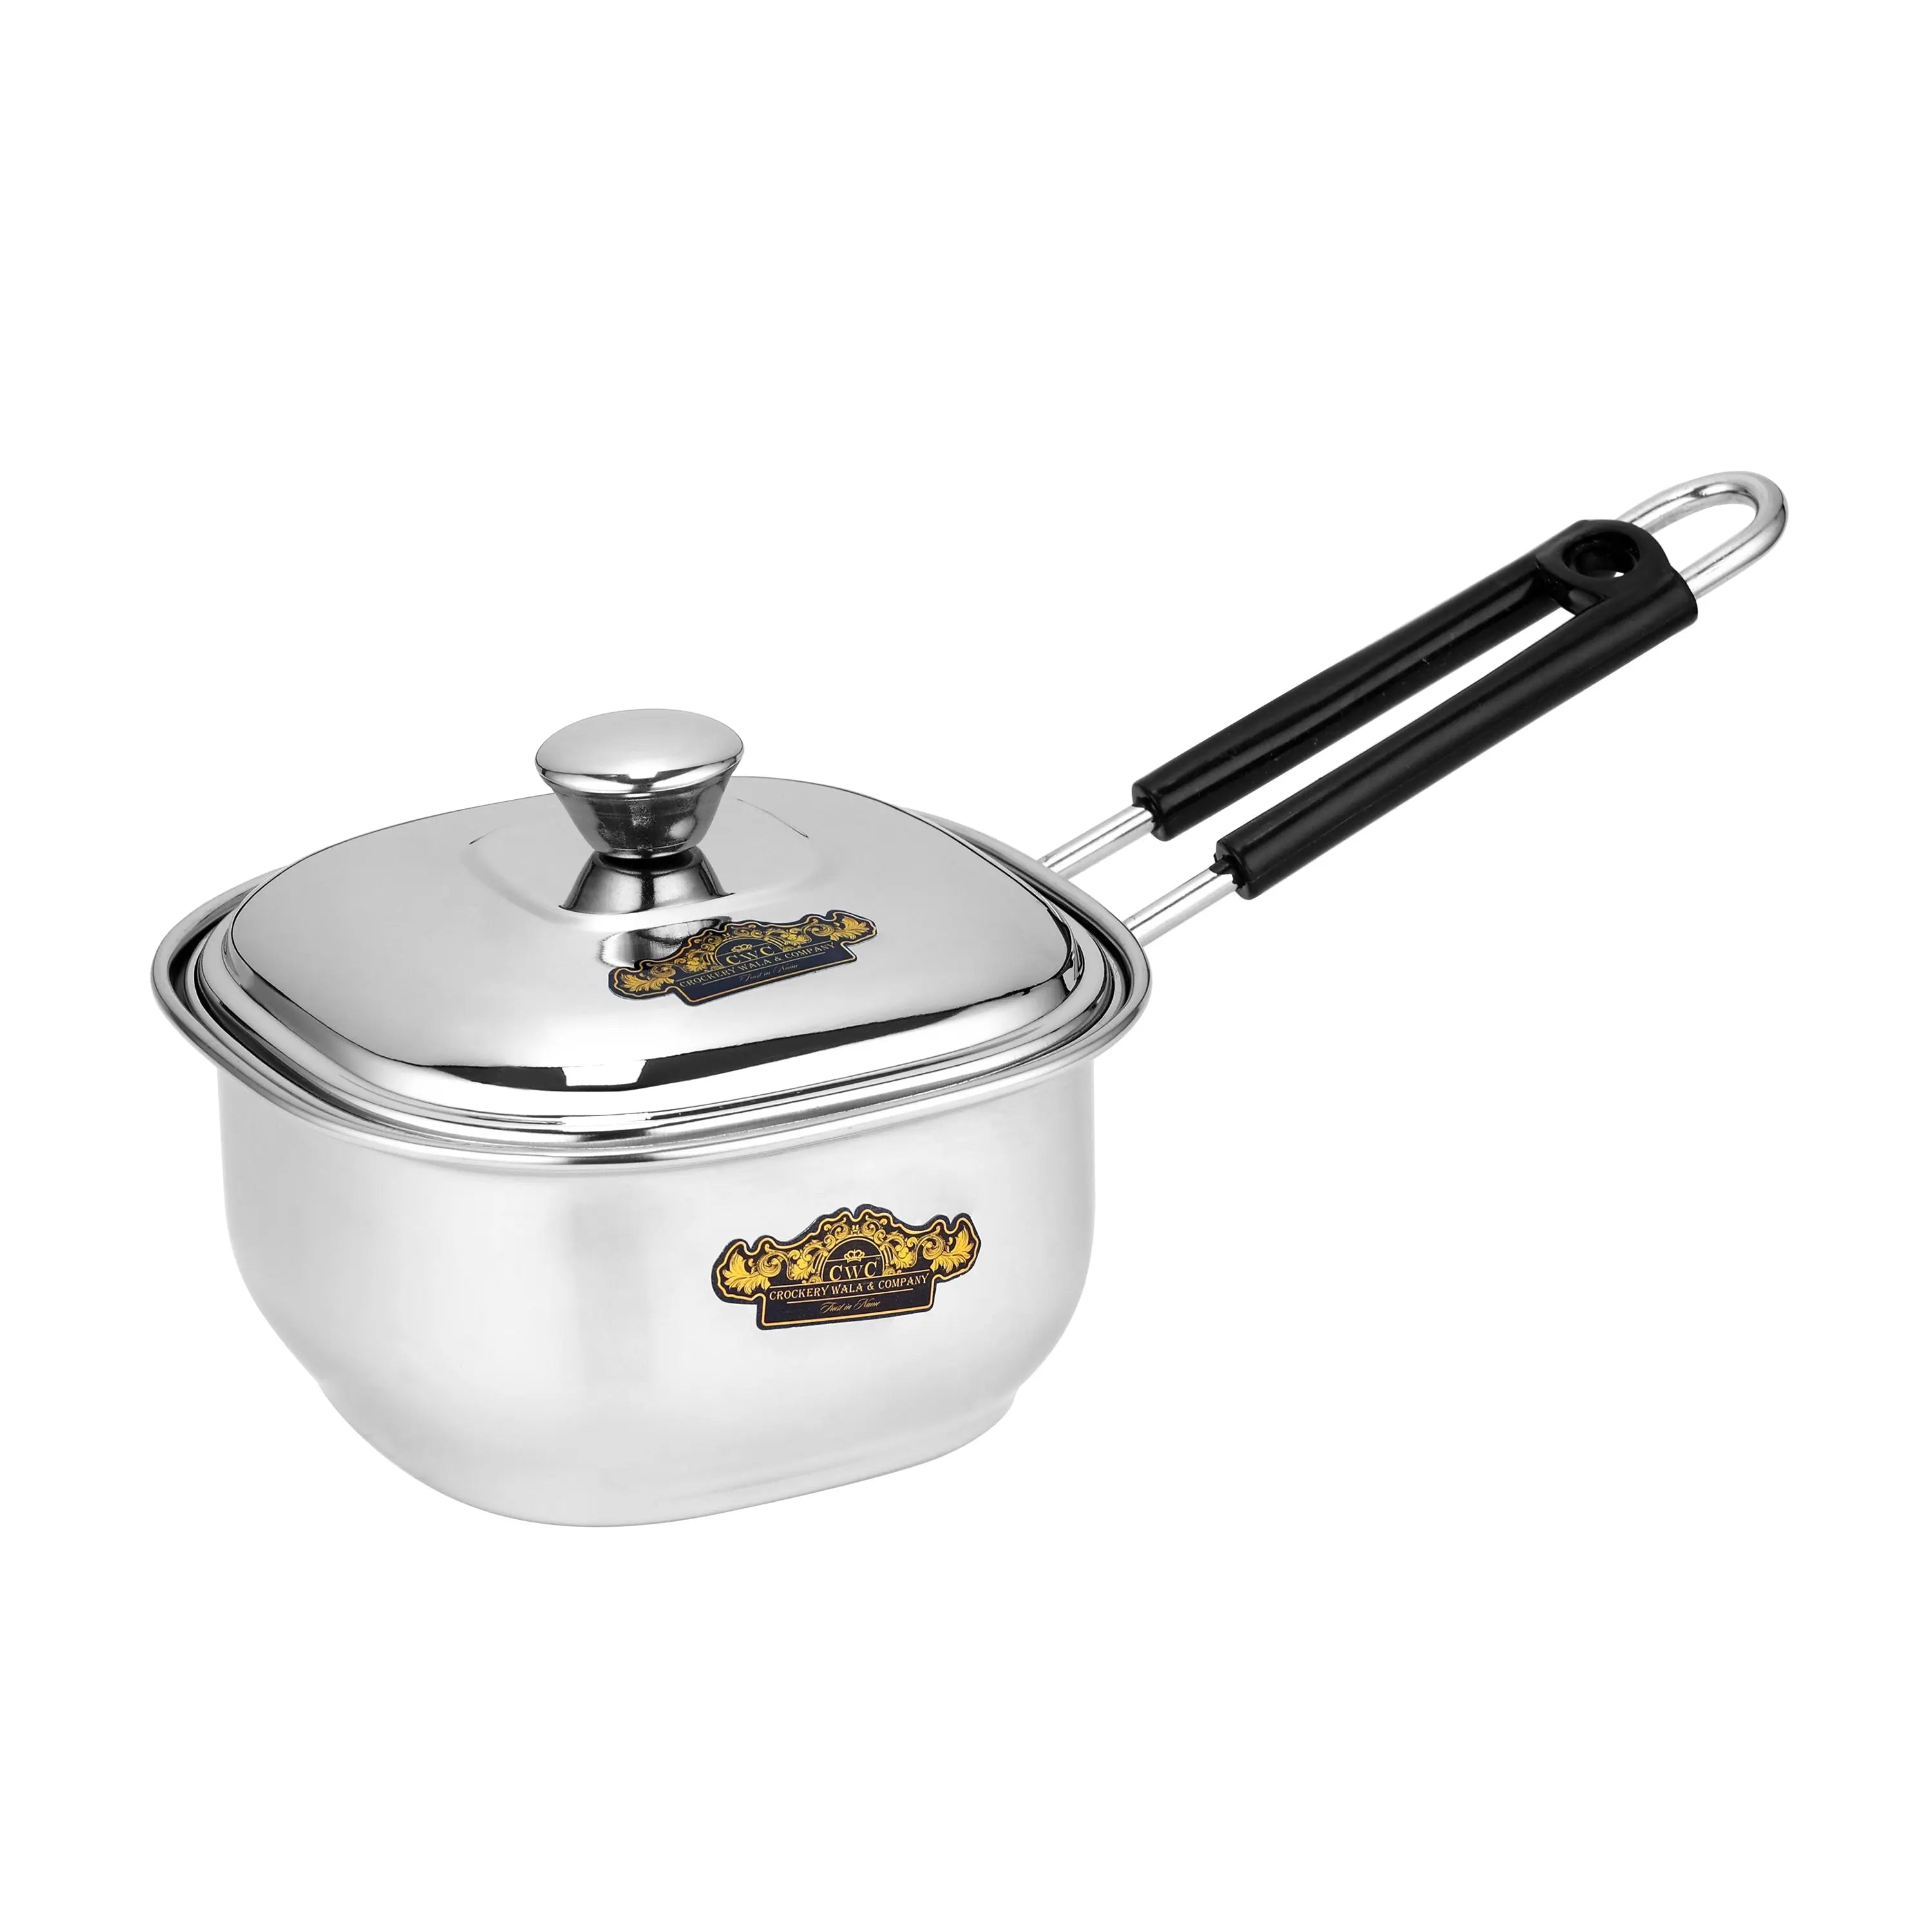 STAINLESS STEEL SQUARE BELLY SAUCE PAN WITH LID - CROCKERY WALA AND COMPANY 